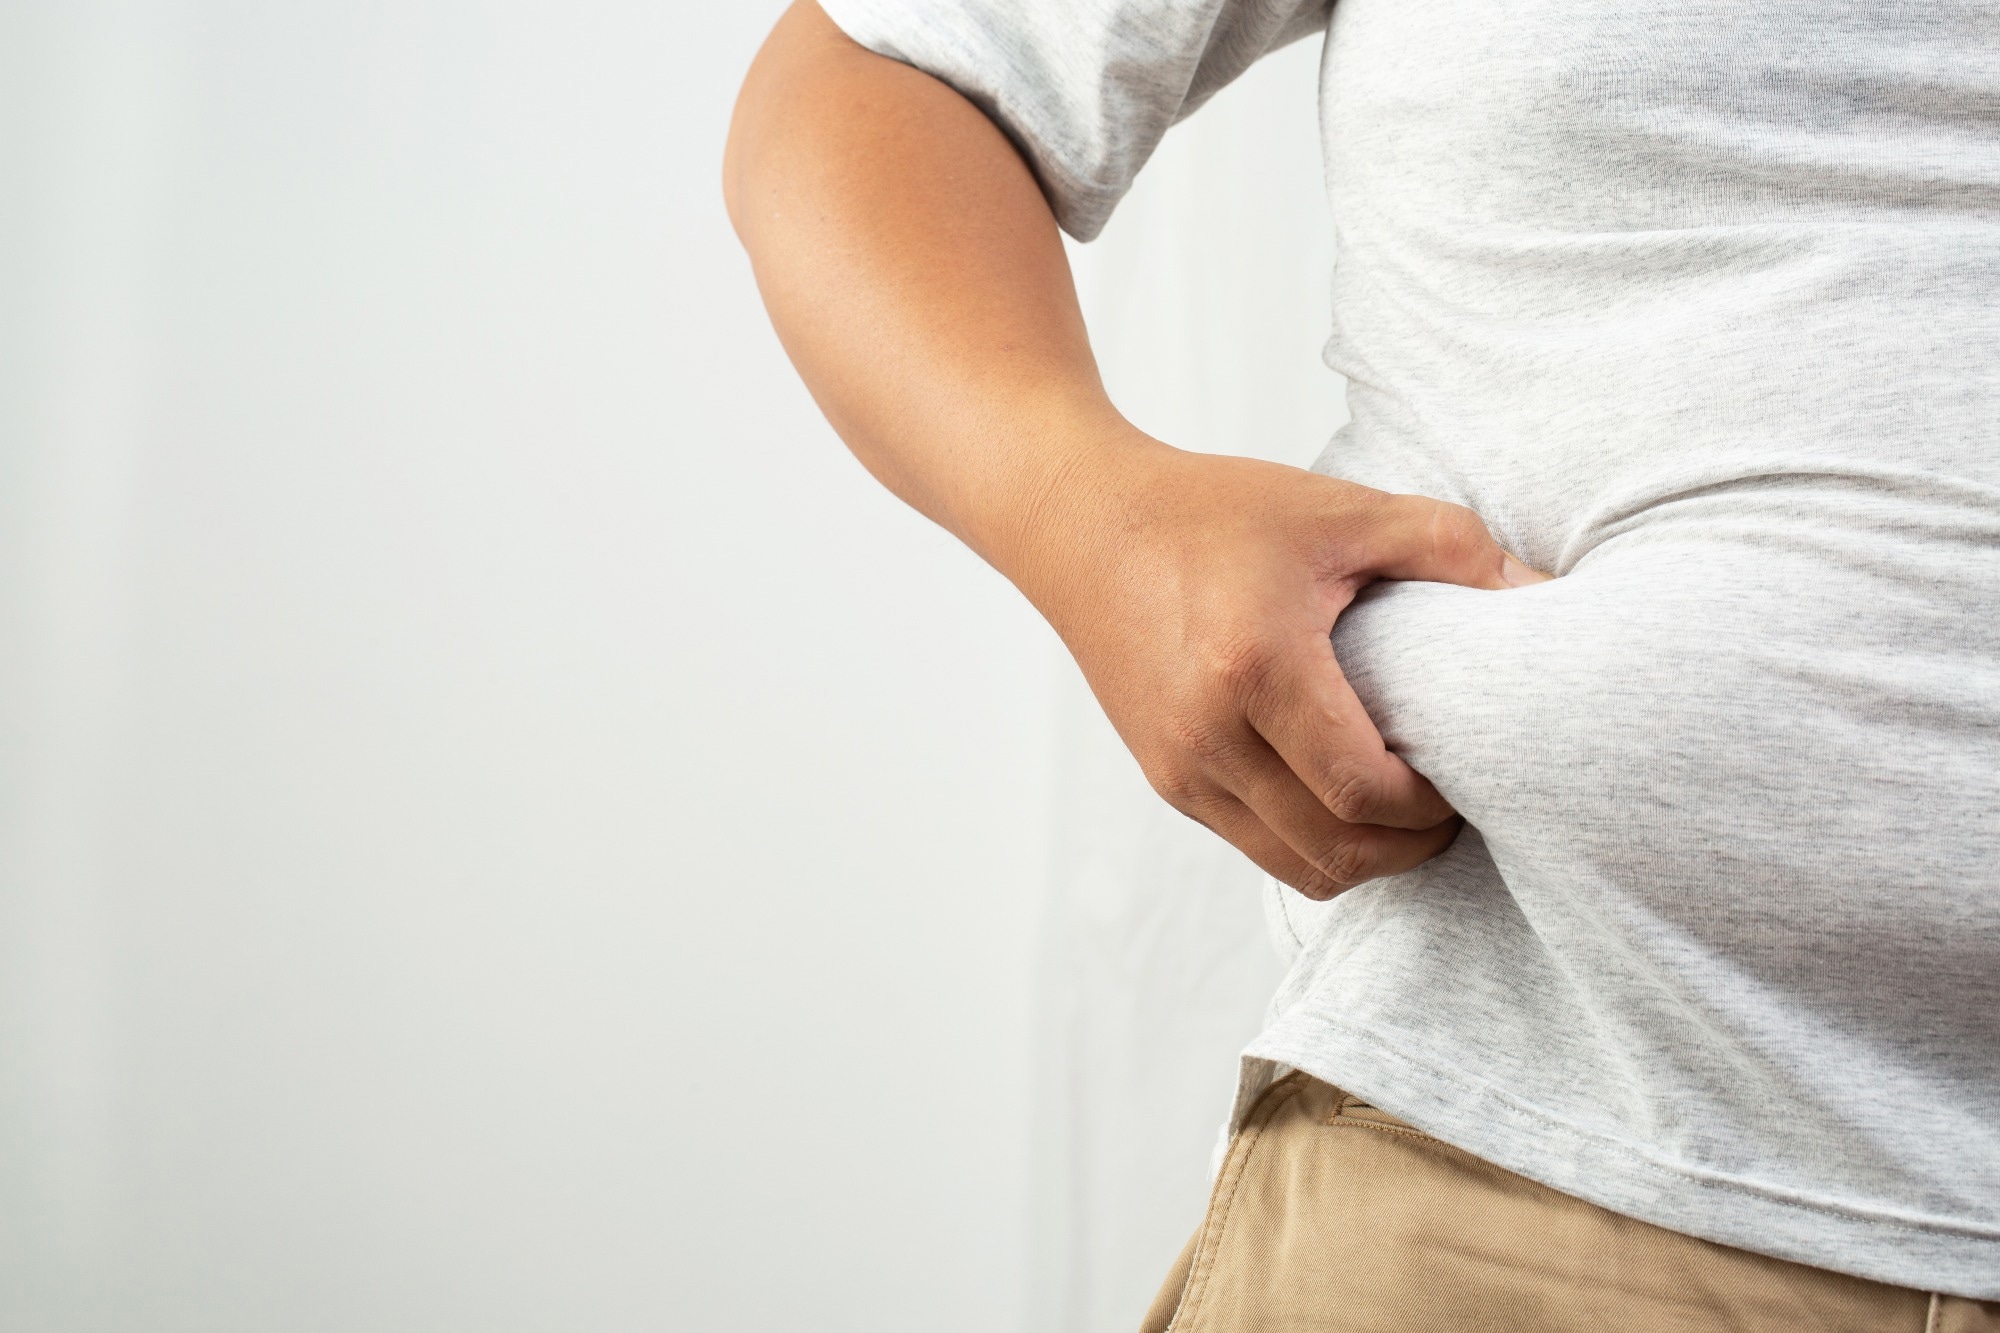 Study: Dual gut hormone receptor agonists for diabetes and obesity. Image Credit: SHISANUPONG1986 / Shutterstock